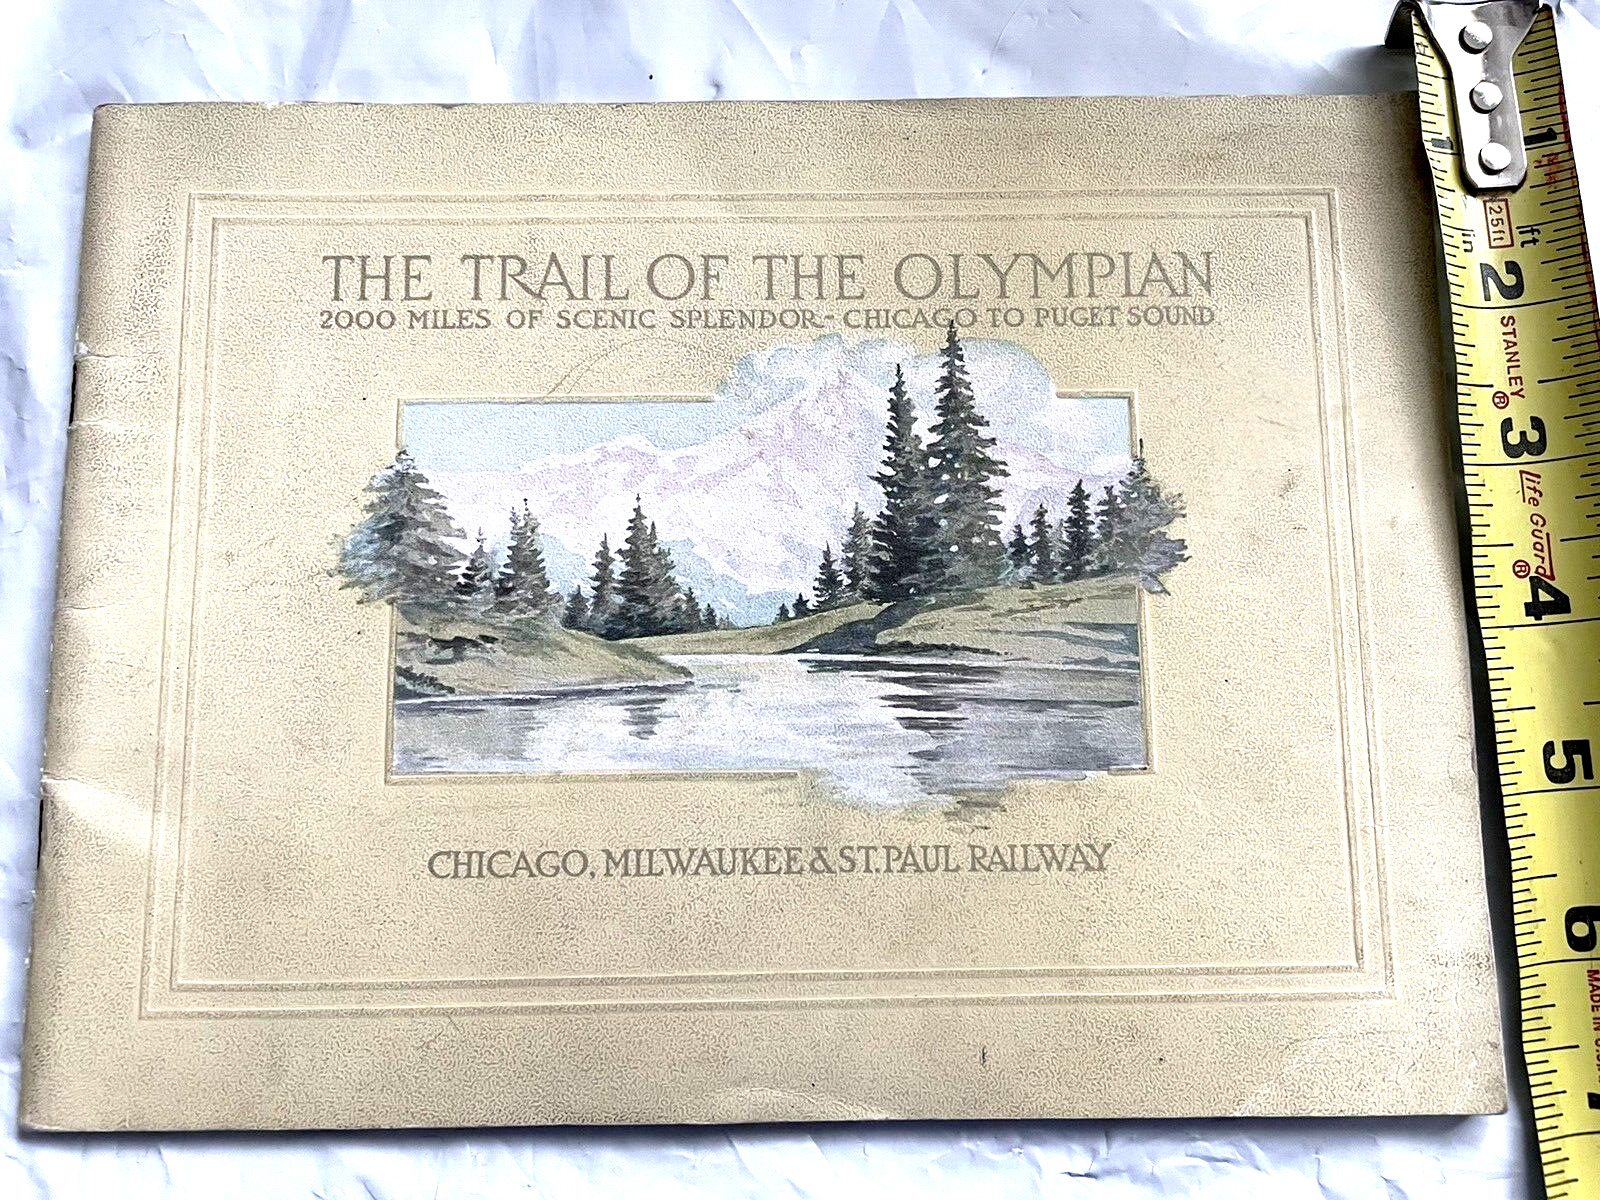 THE TRAIL OF THE OLYMPIAN 2000 MILES FROM CHICAGO TO PUGET SOUND 1915 ANTIQUE